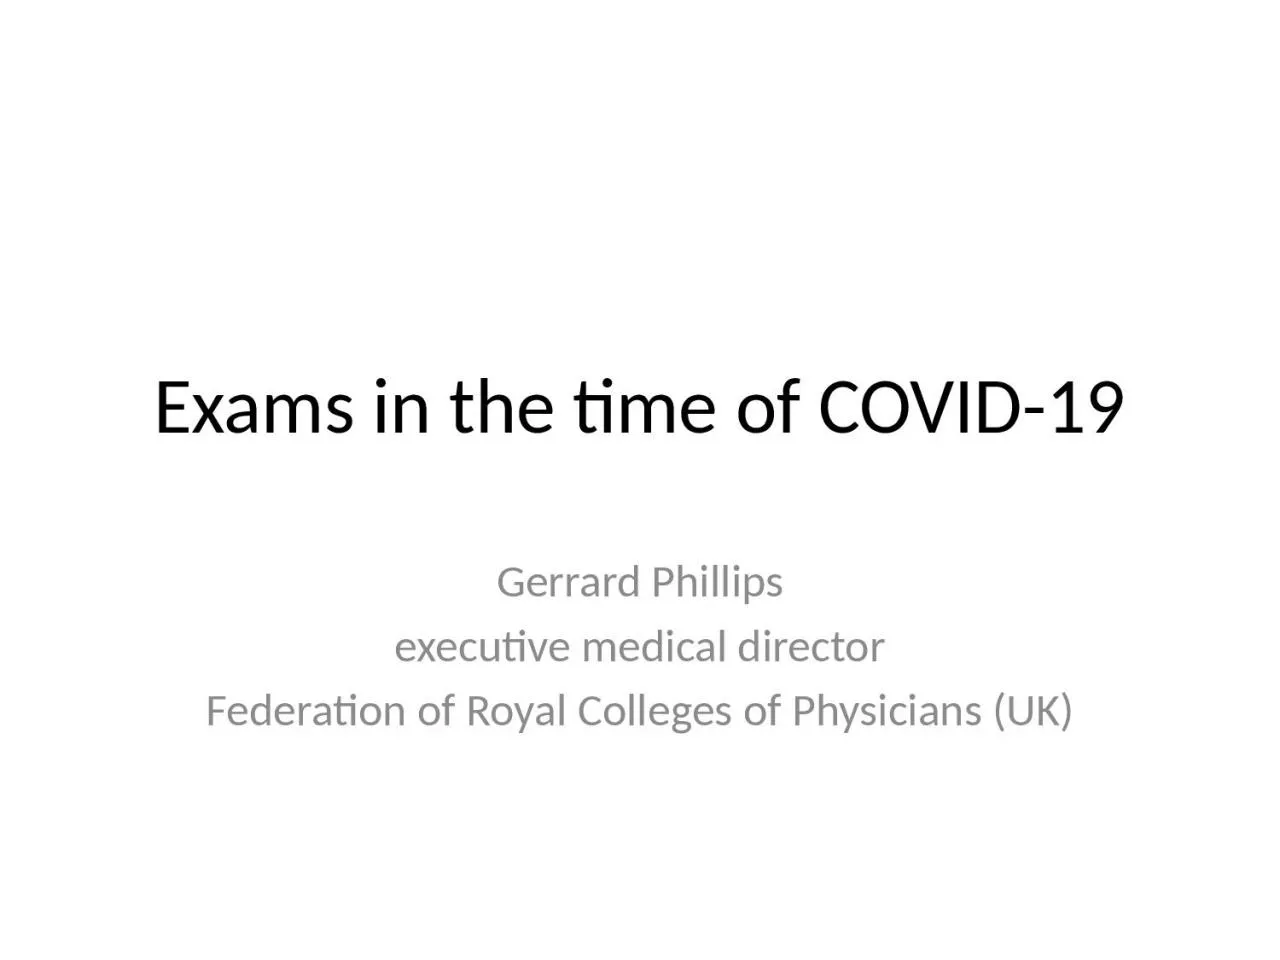 Exams in the time of COVID-19